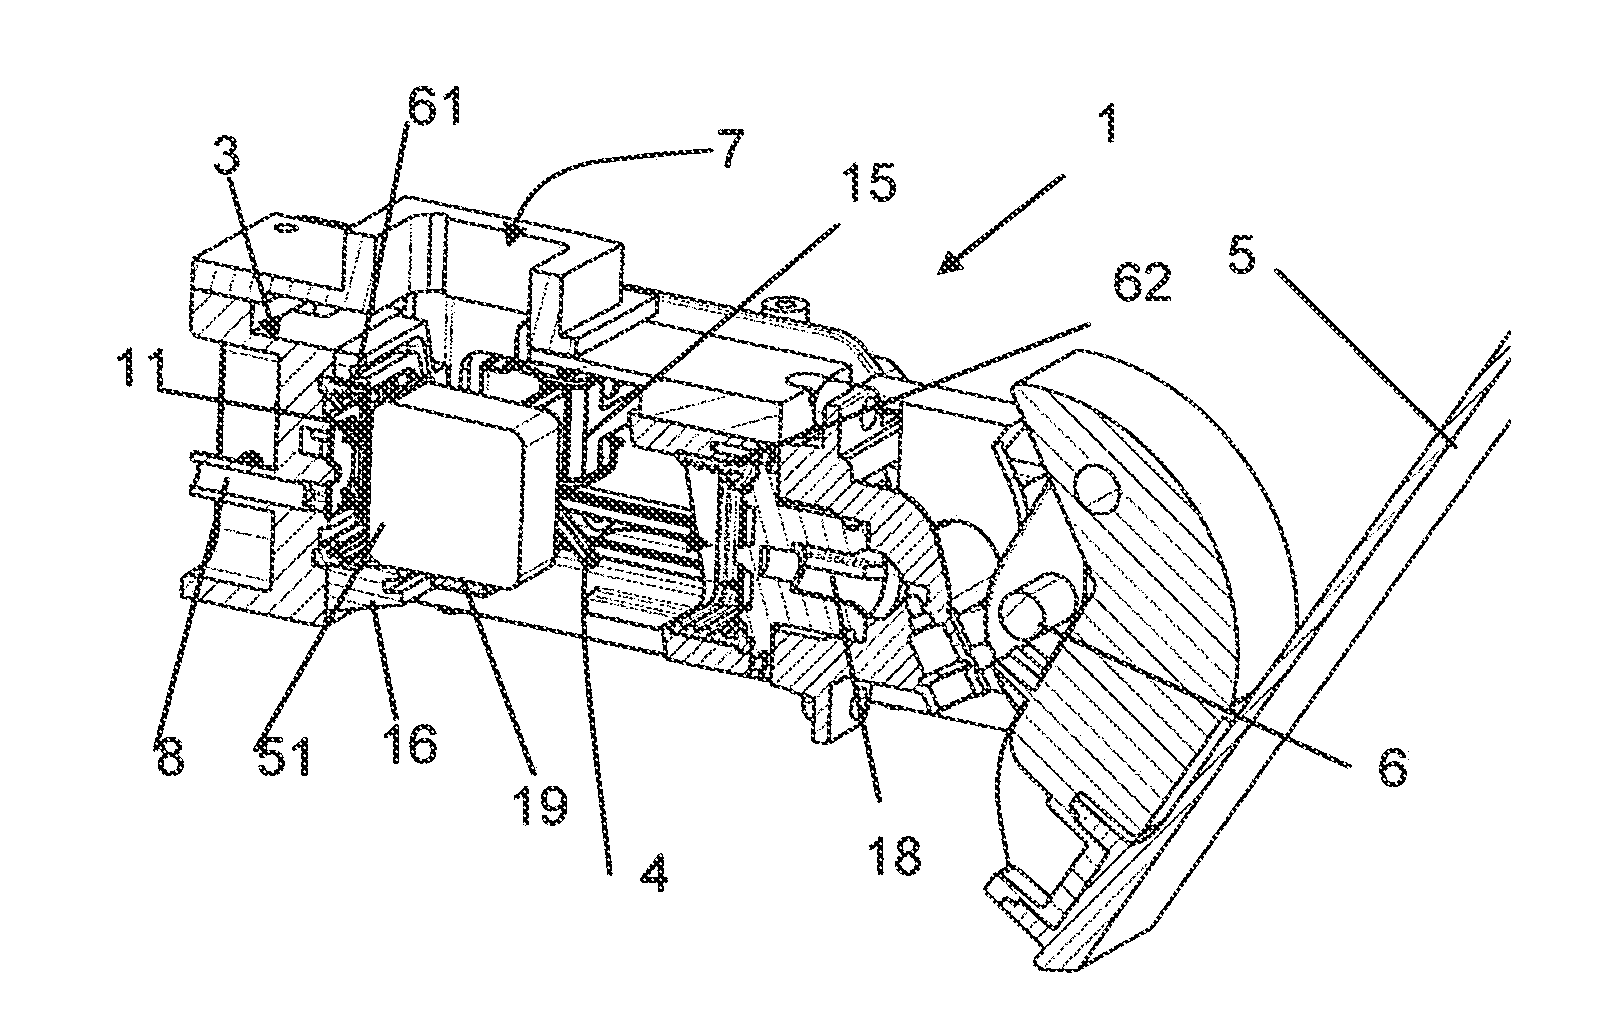 Extraction device and sealing system